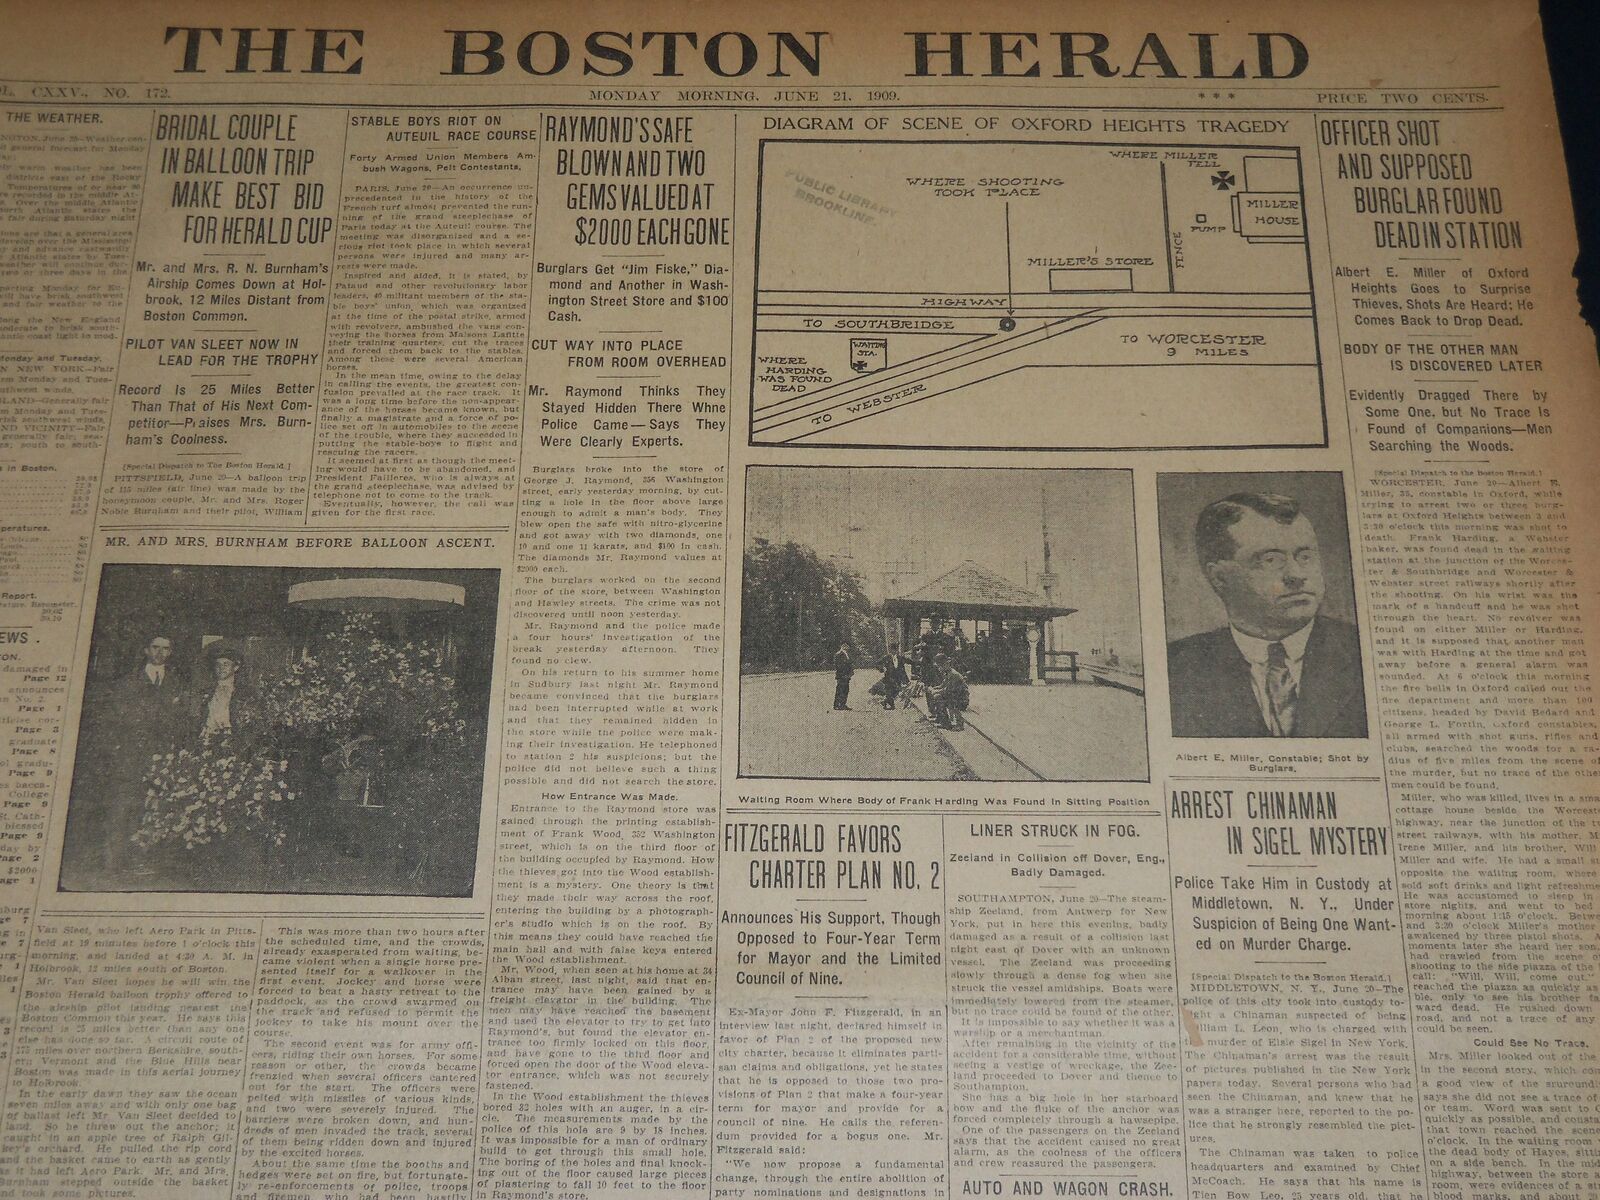 1909 JUNE 21 THE BOSTON HERALD NEWSPAPER - OXFORD HEIGHTS TRAGEDY - BH 372